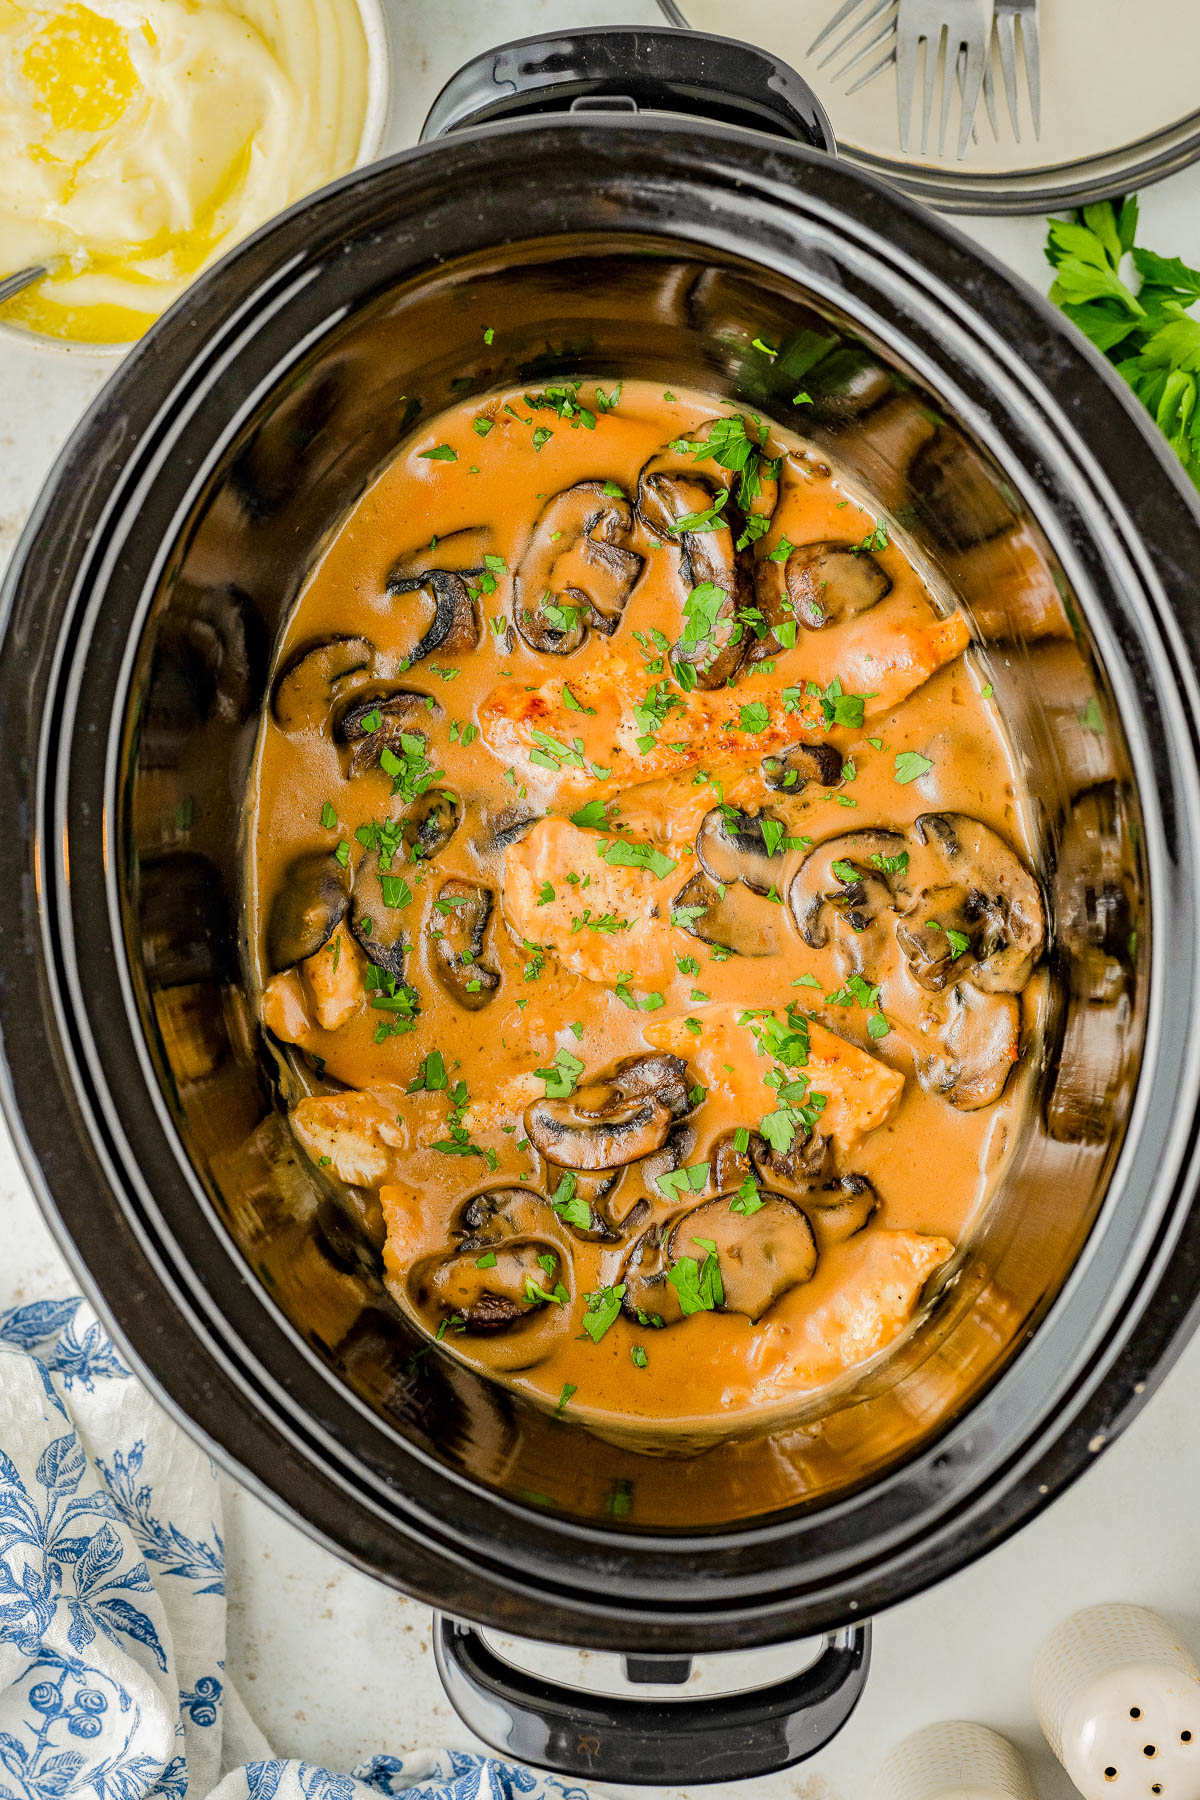 This 2-Ingredient Slow Cooker Recipe Fed My Family For an Entire